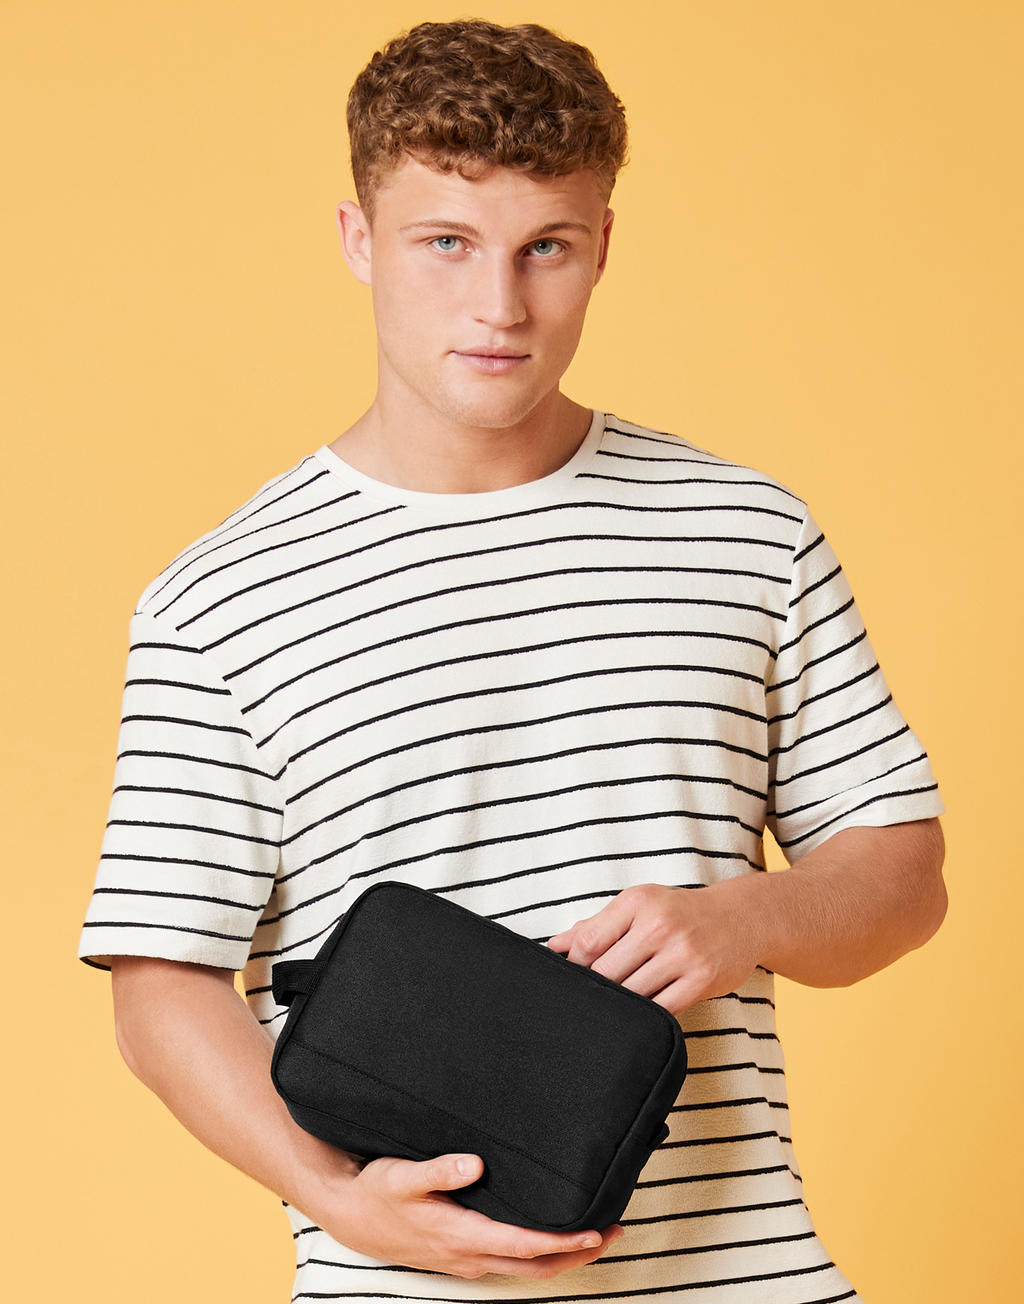  Recycled Essentials Wash Bag in Farbe Black